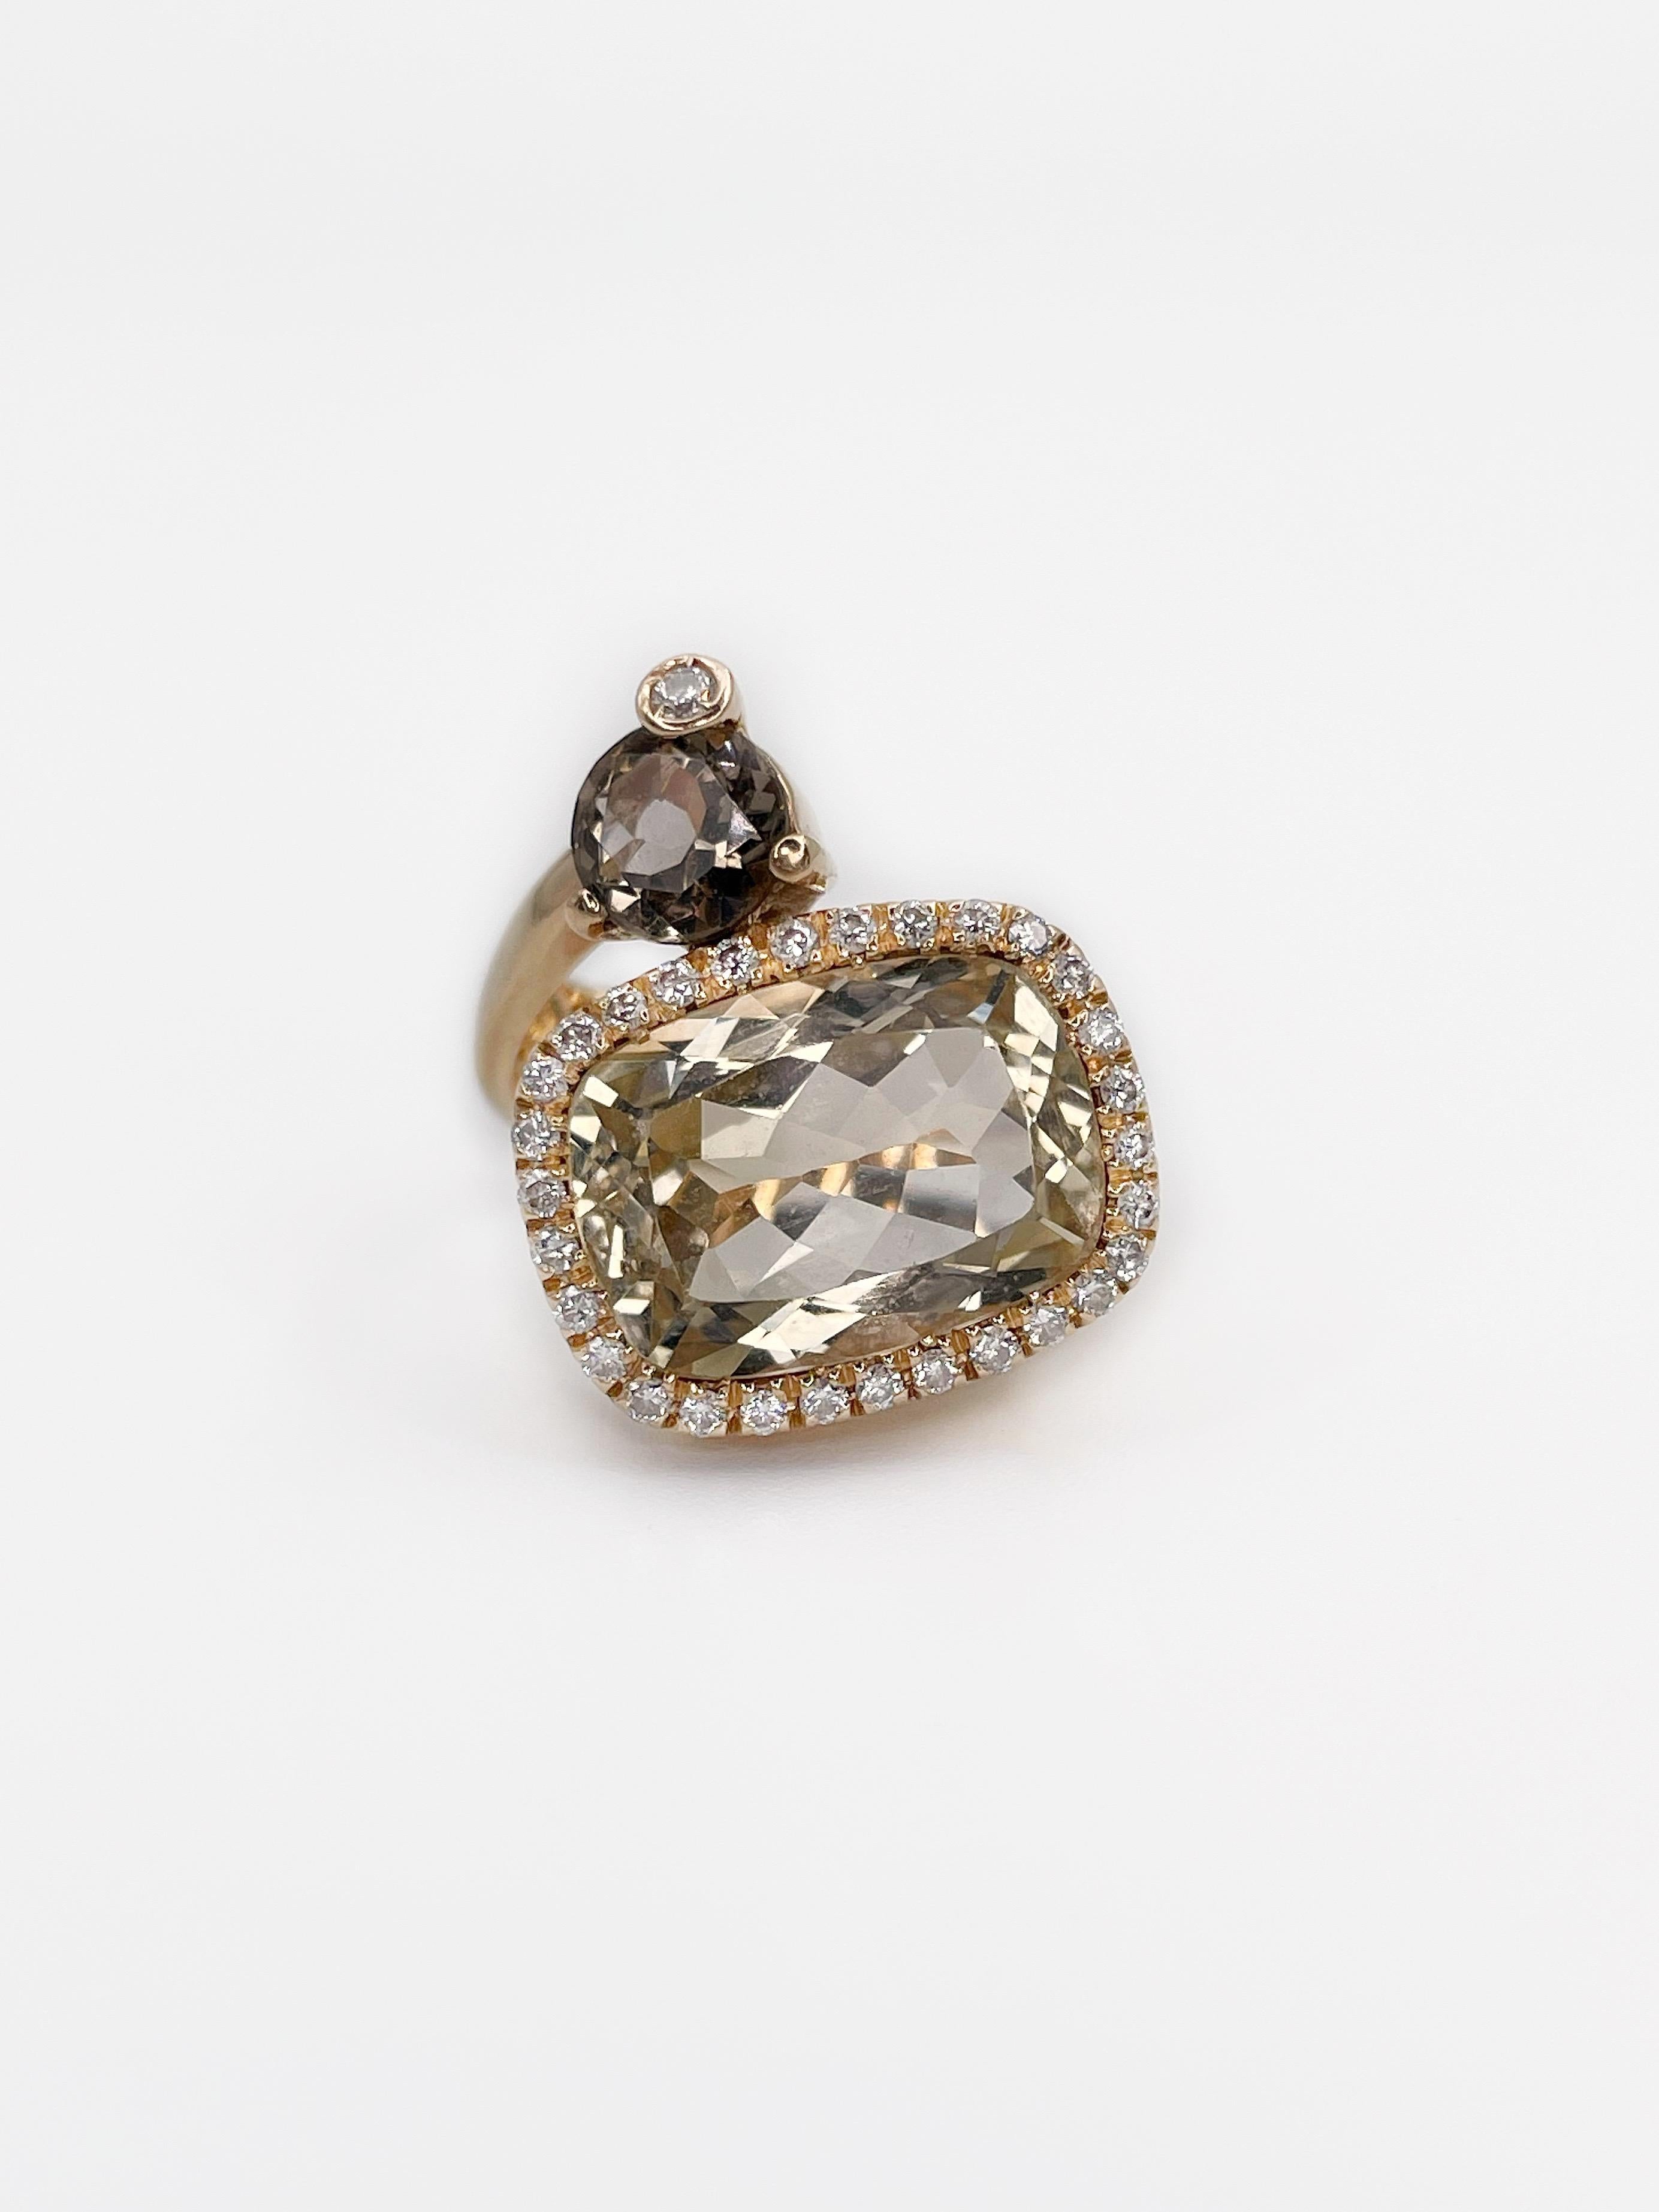 This artsy ring is made by Italian brand Criso. It is in yellow 18K gold and features two different shapes stones. Rectangle citrine is surounded by 30 round brilliant cut diamonds. Round smoky quartz is accompanied with one brilliant cut diamond.